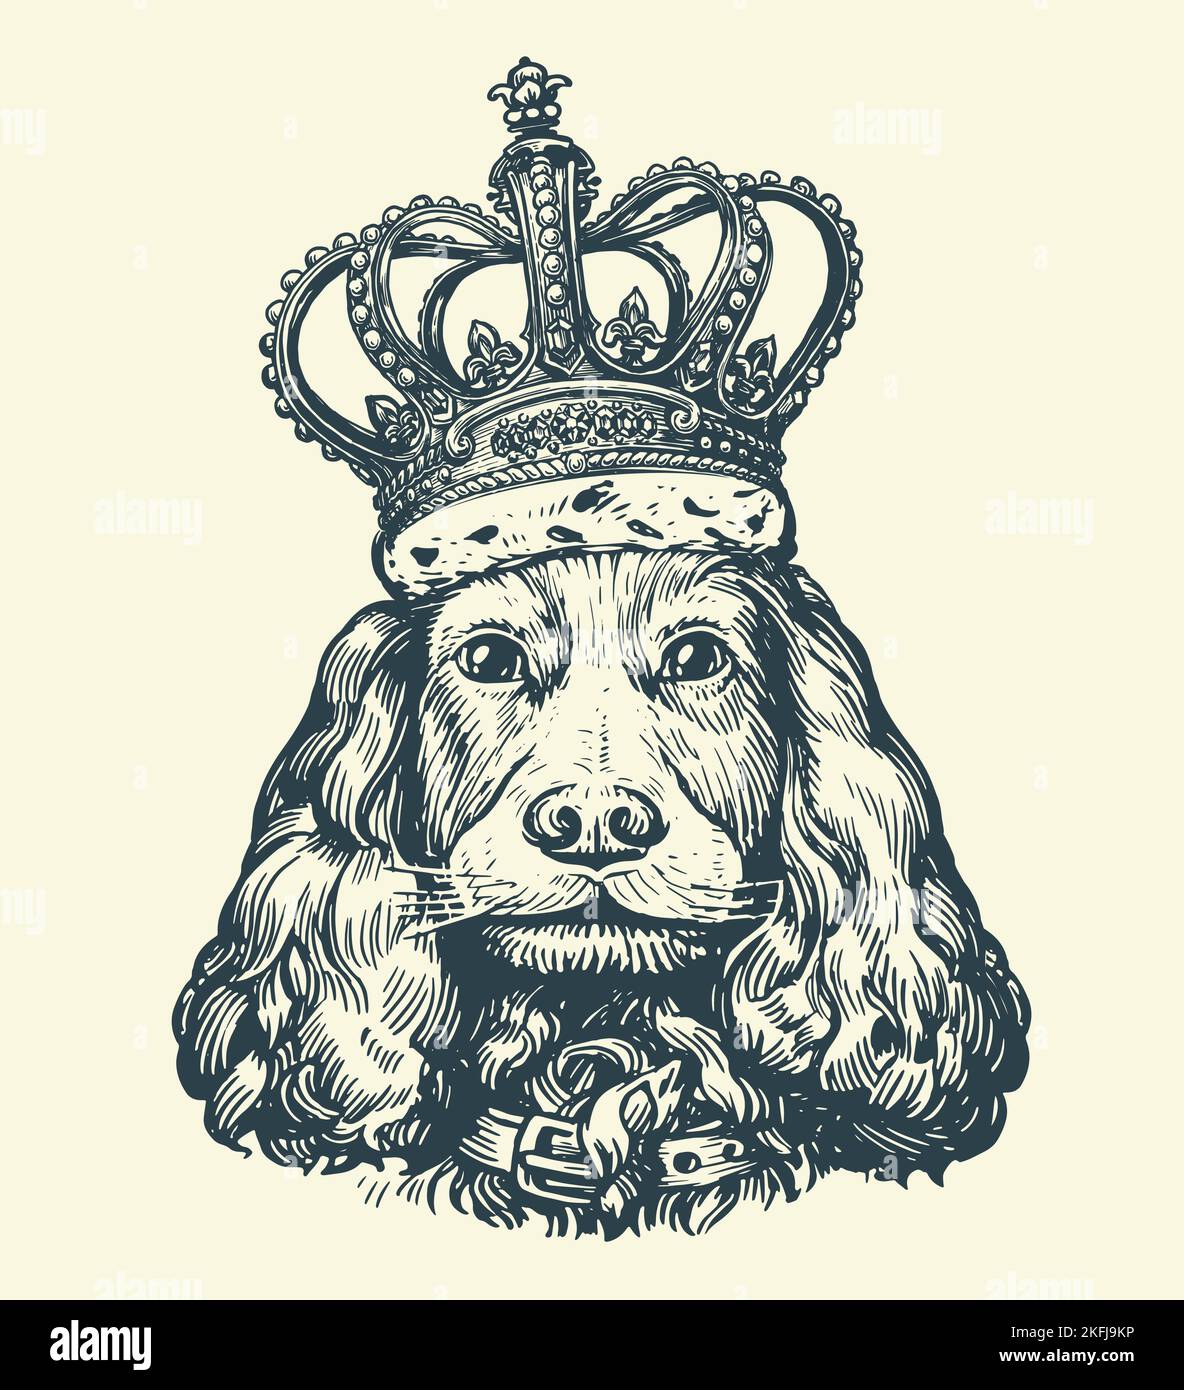 Portrait beautiful DOG with royal crown. Pet animal, cute puppy in vintage engraving style. Sketch vector illustration Stock Vector